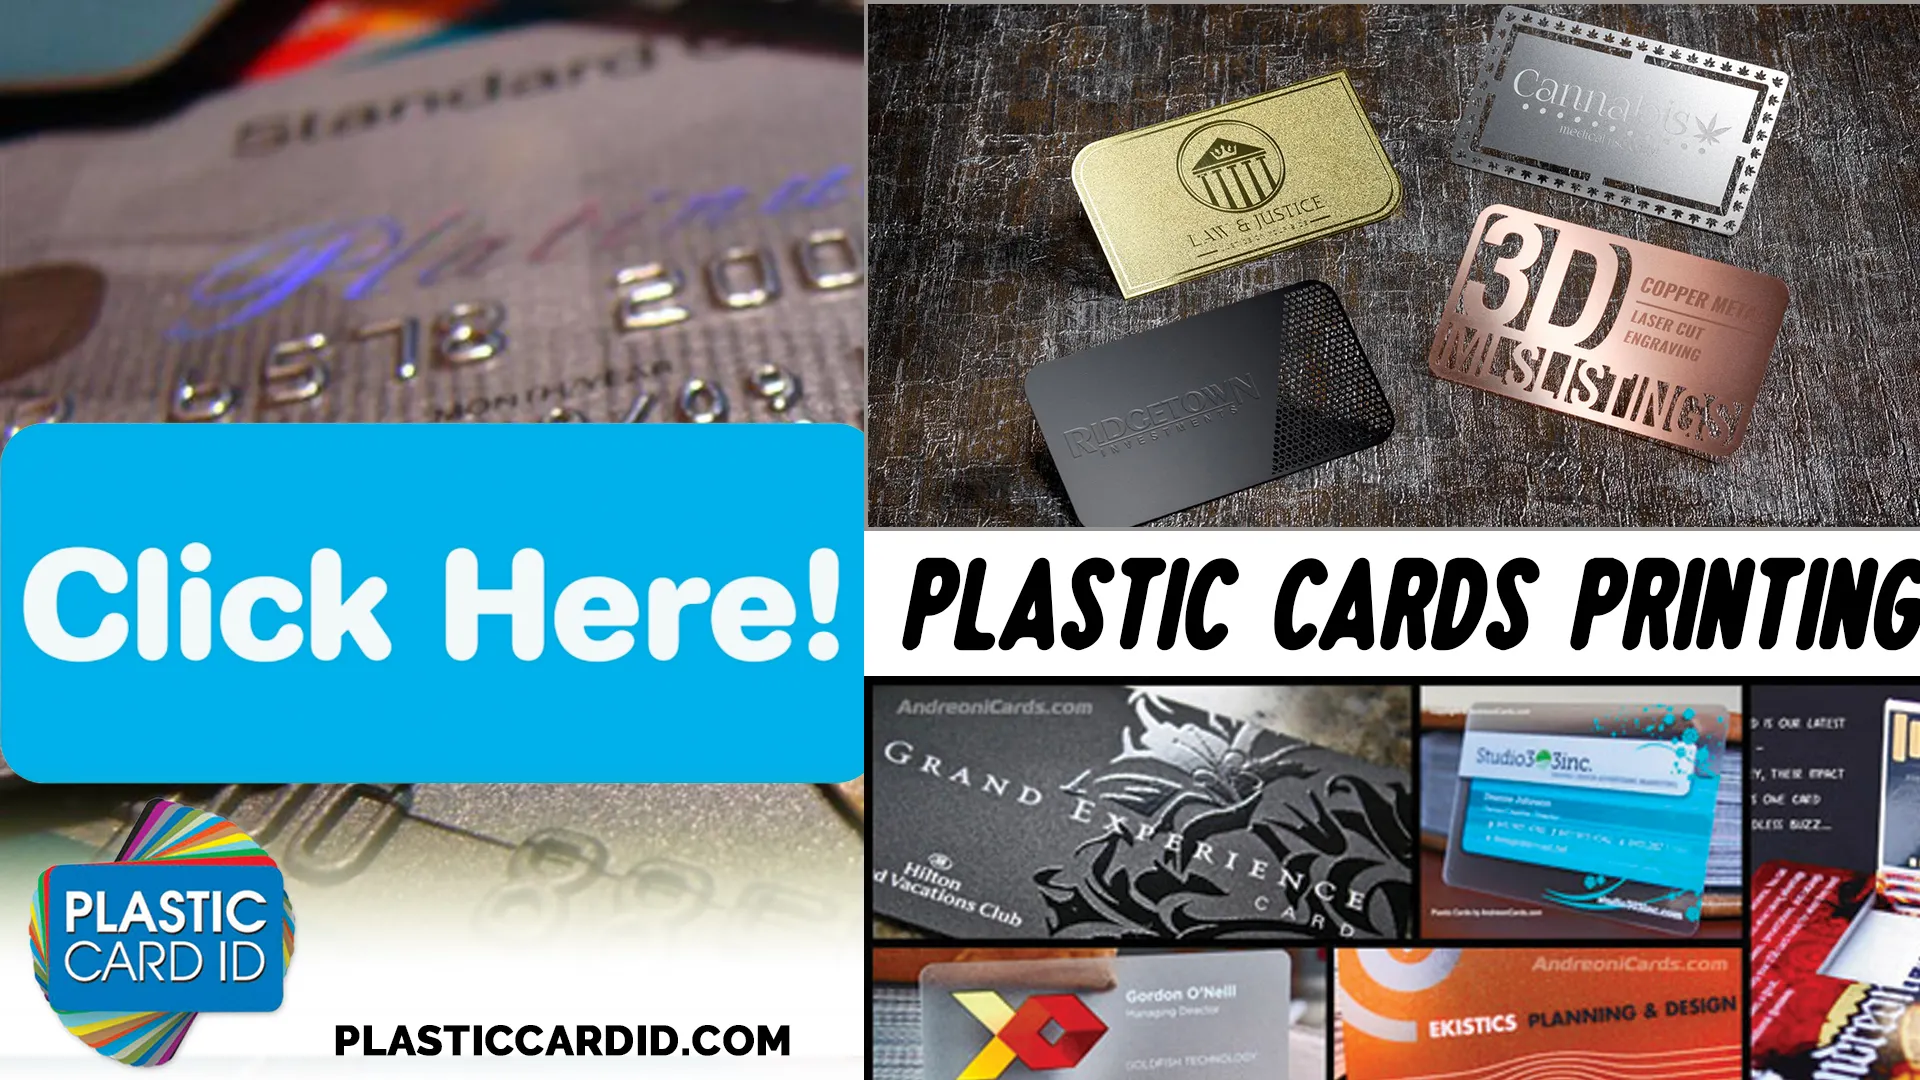 Welcome to the Ultimate Security Solution for Your Plastic Cards